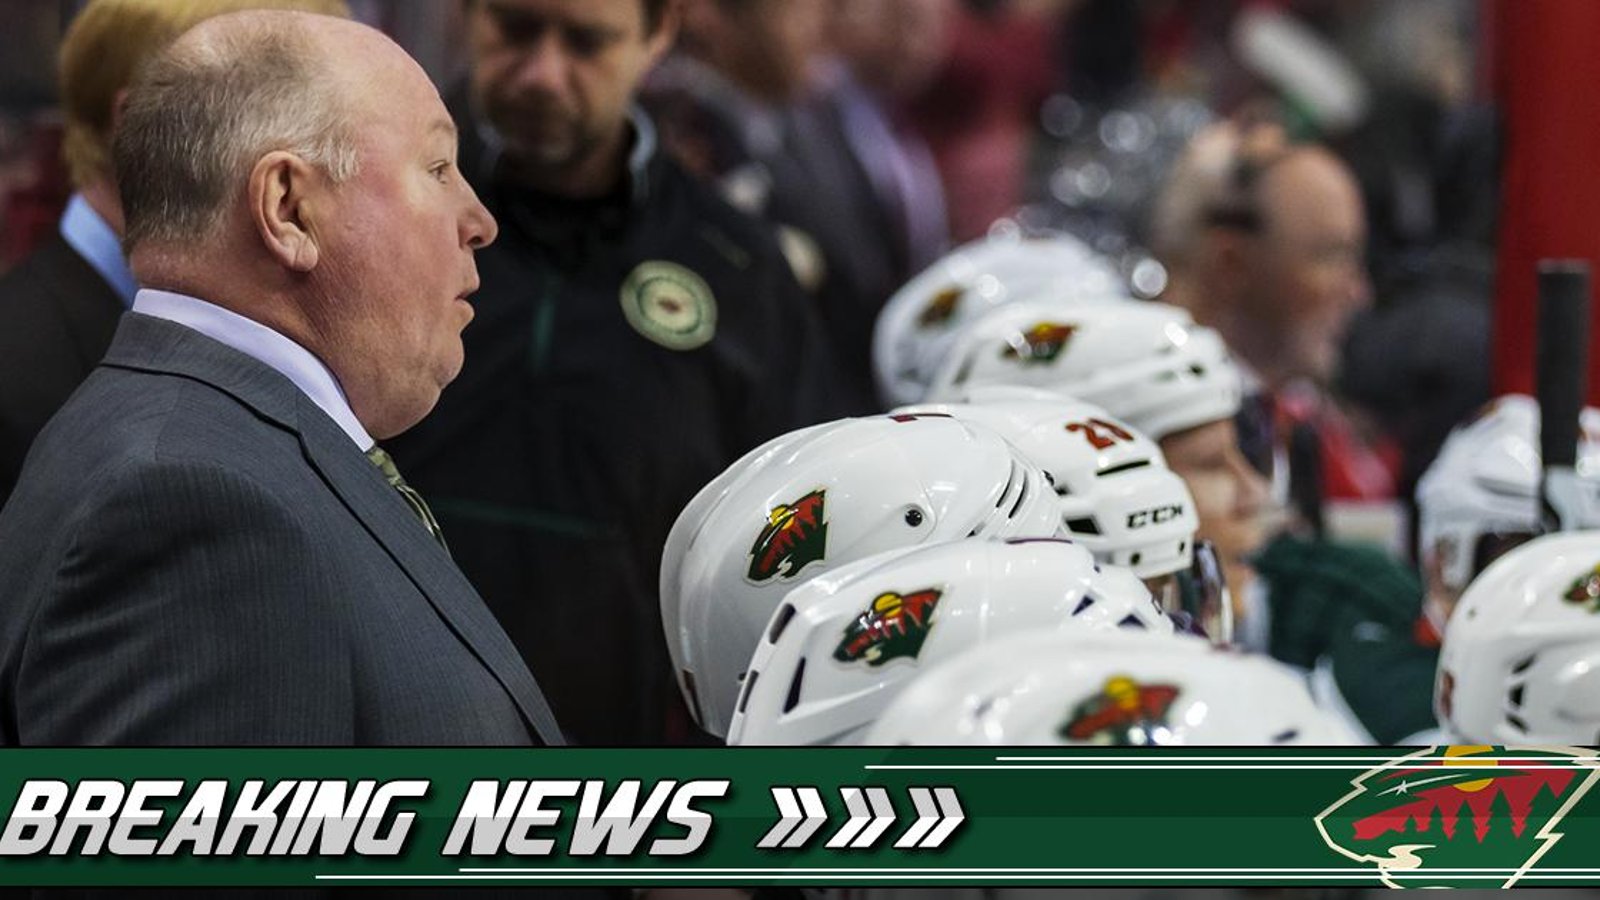 Breaking news: Wild assign former first round pick to the AHL